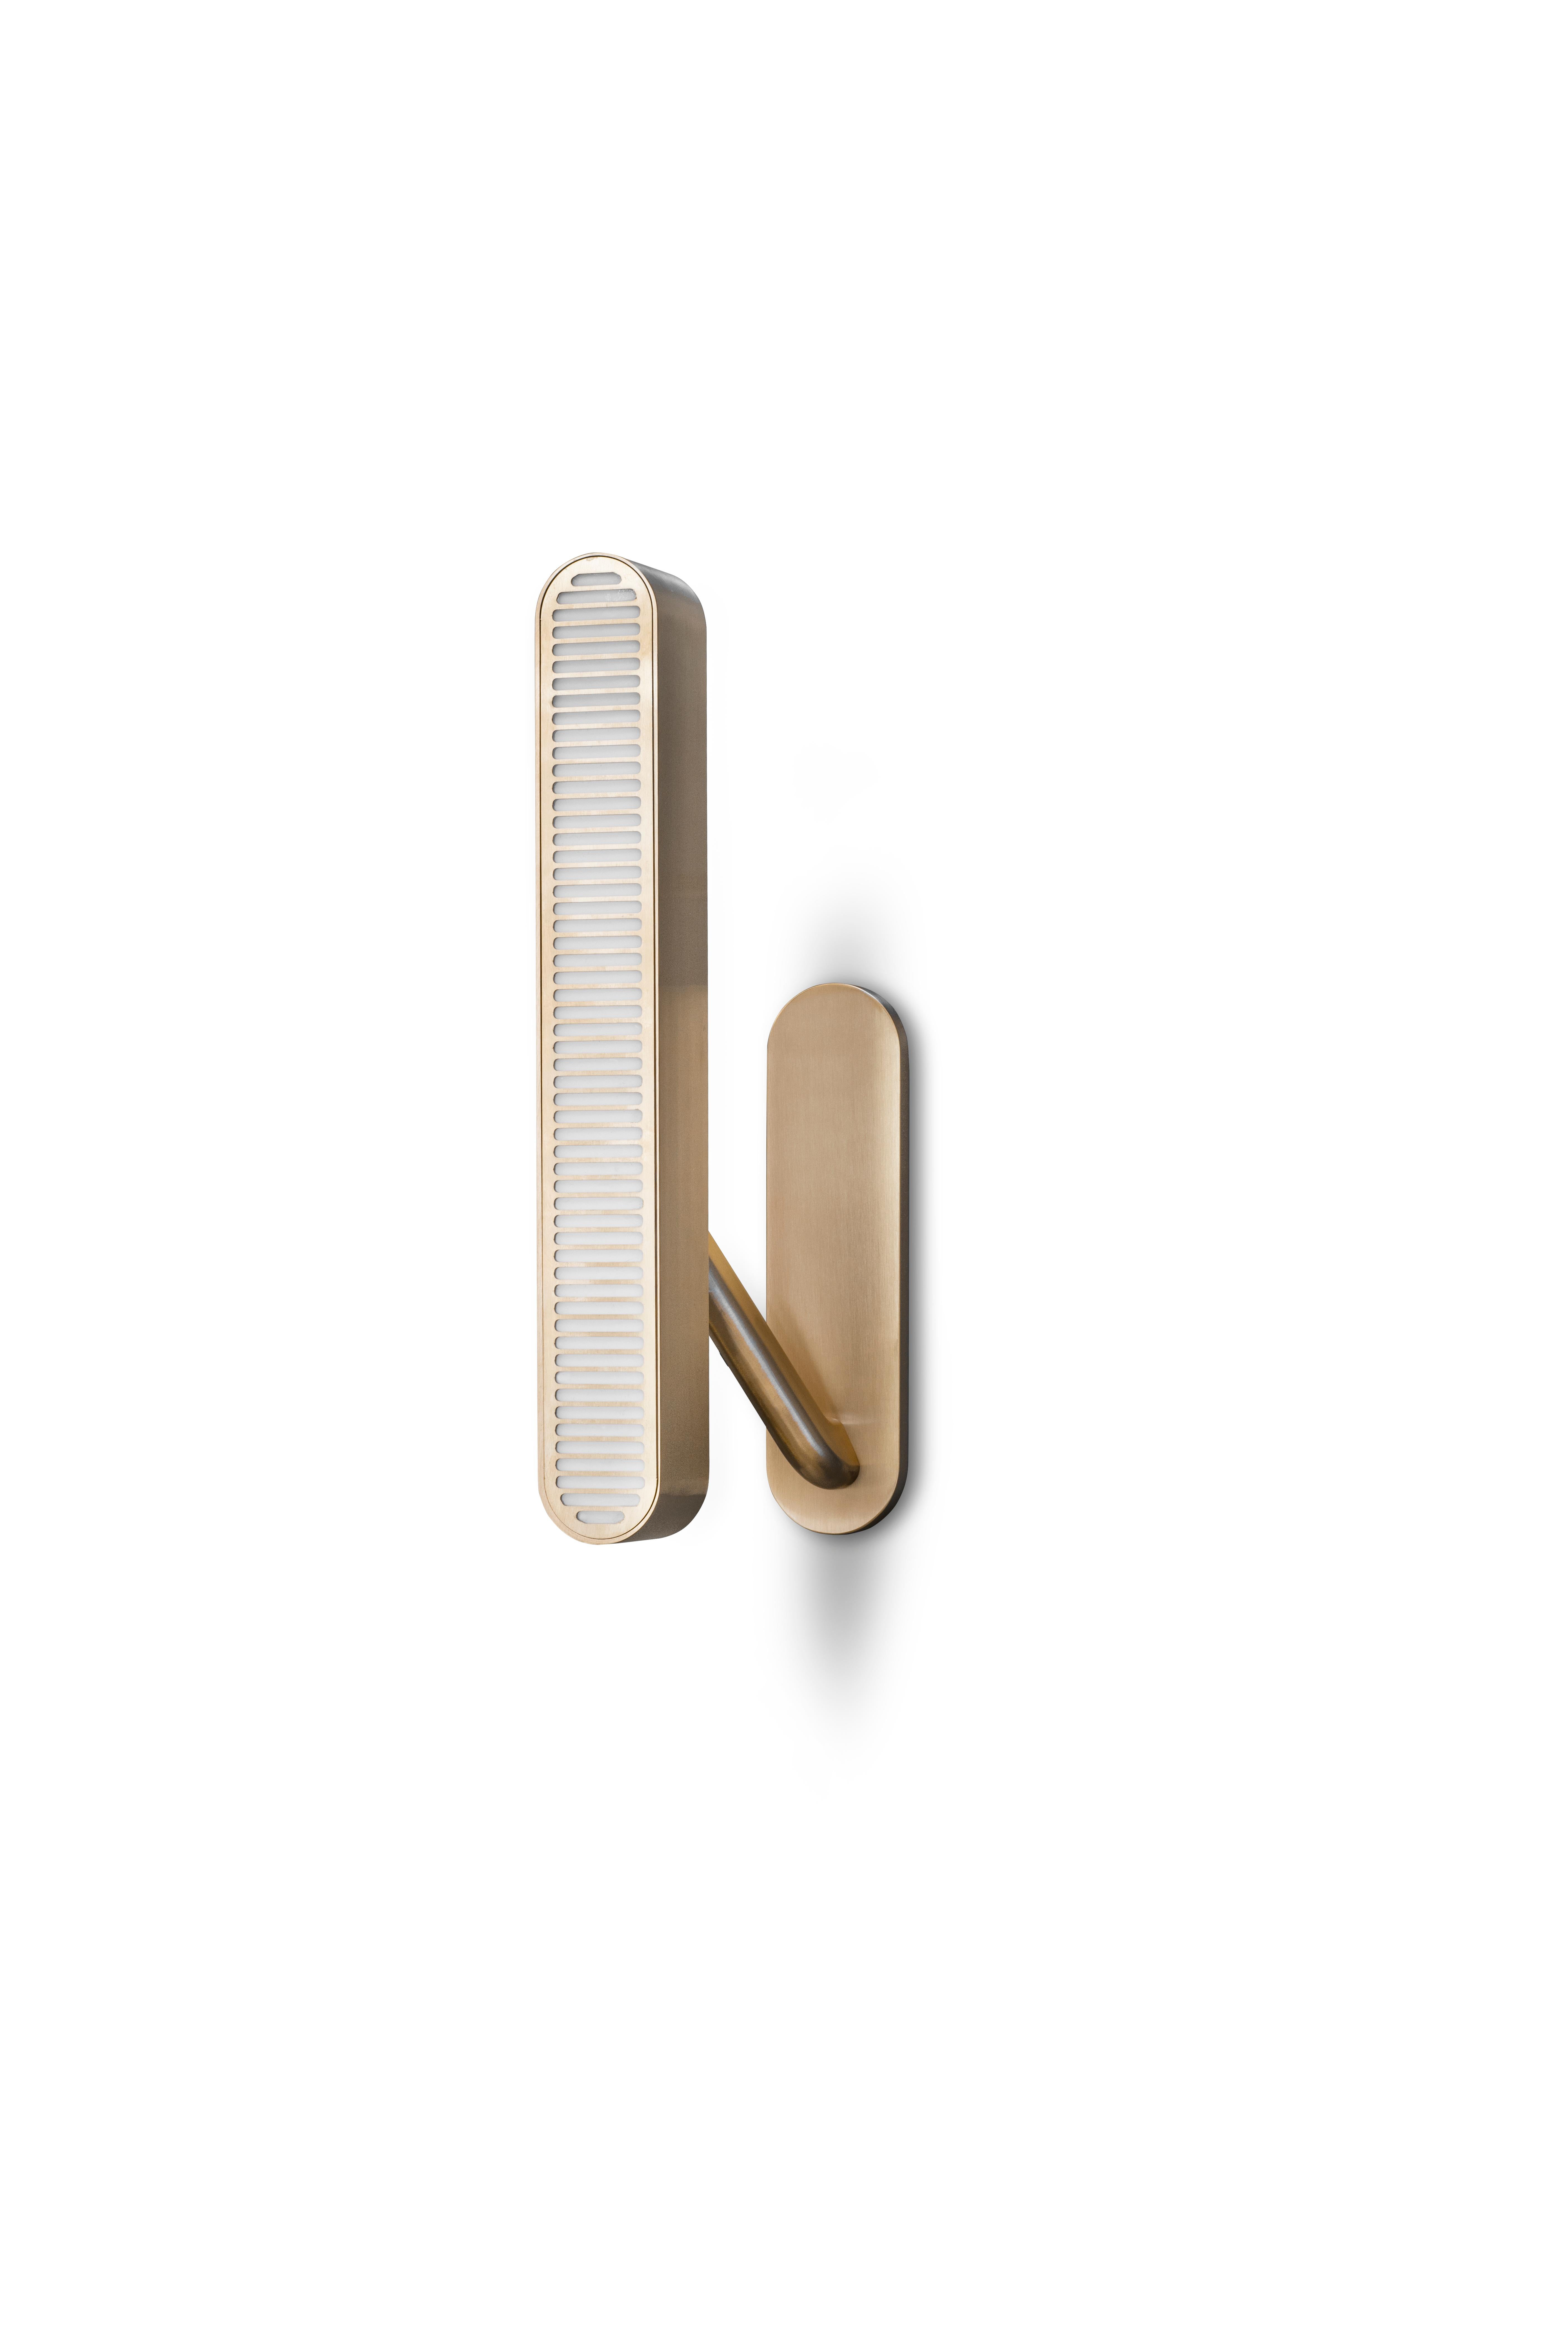 Colt wall light single by Bert Frank
Dimensions: 40 x 10 x 6 cm
Materials: Brass, bronze

Brushed brass lacquered as standard, custom finishes available.

The Bert Frank aesthetic is one of subtle quirks and twists. Asymmetry is one of those. Colt